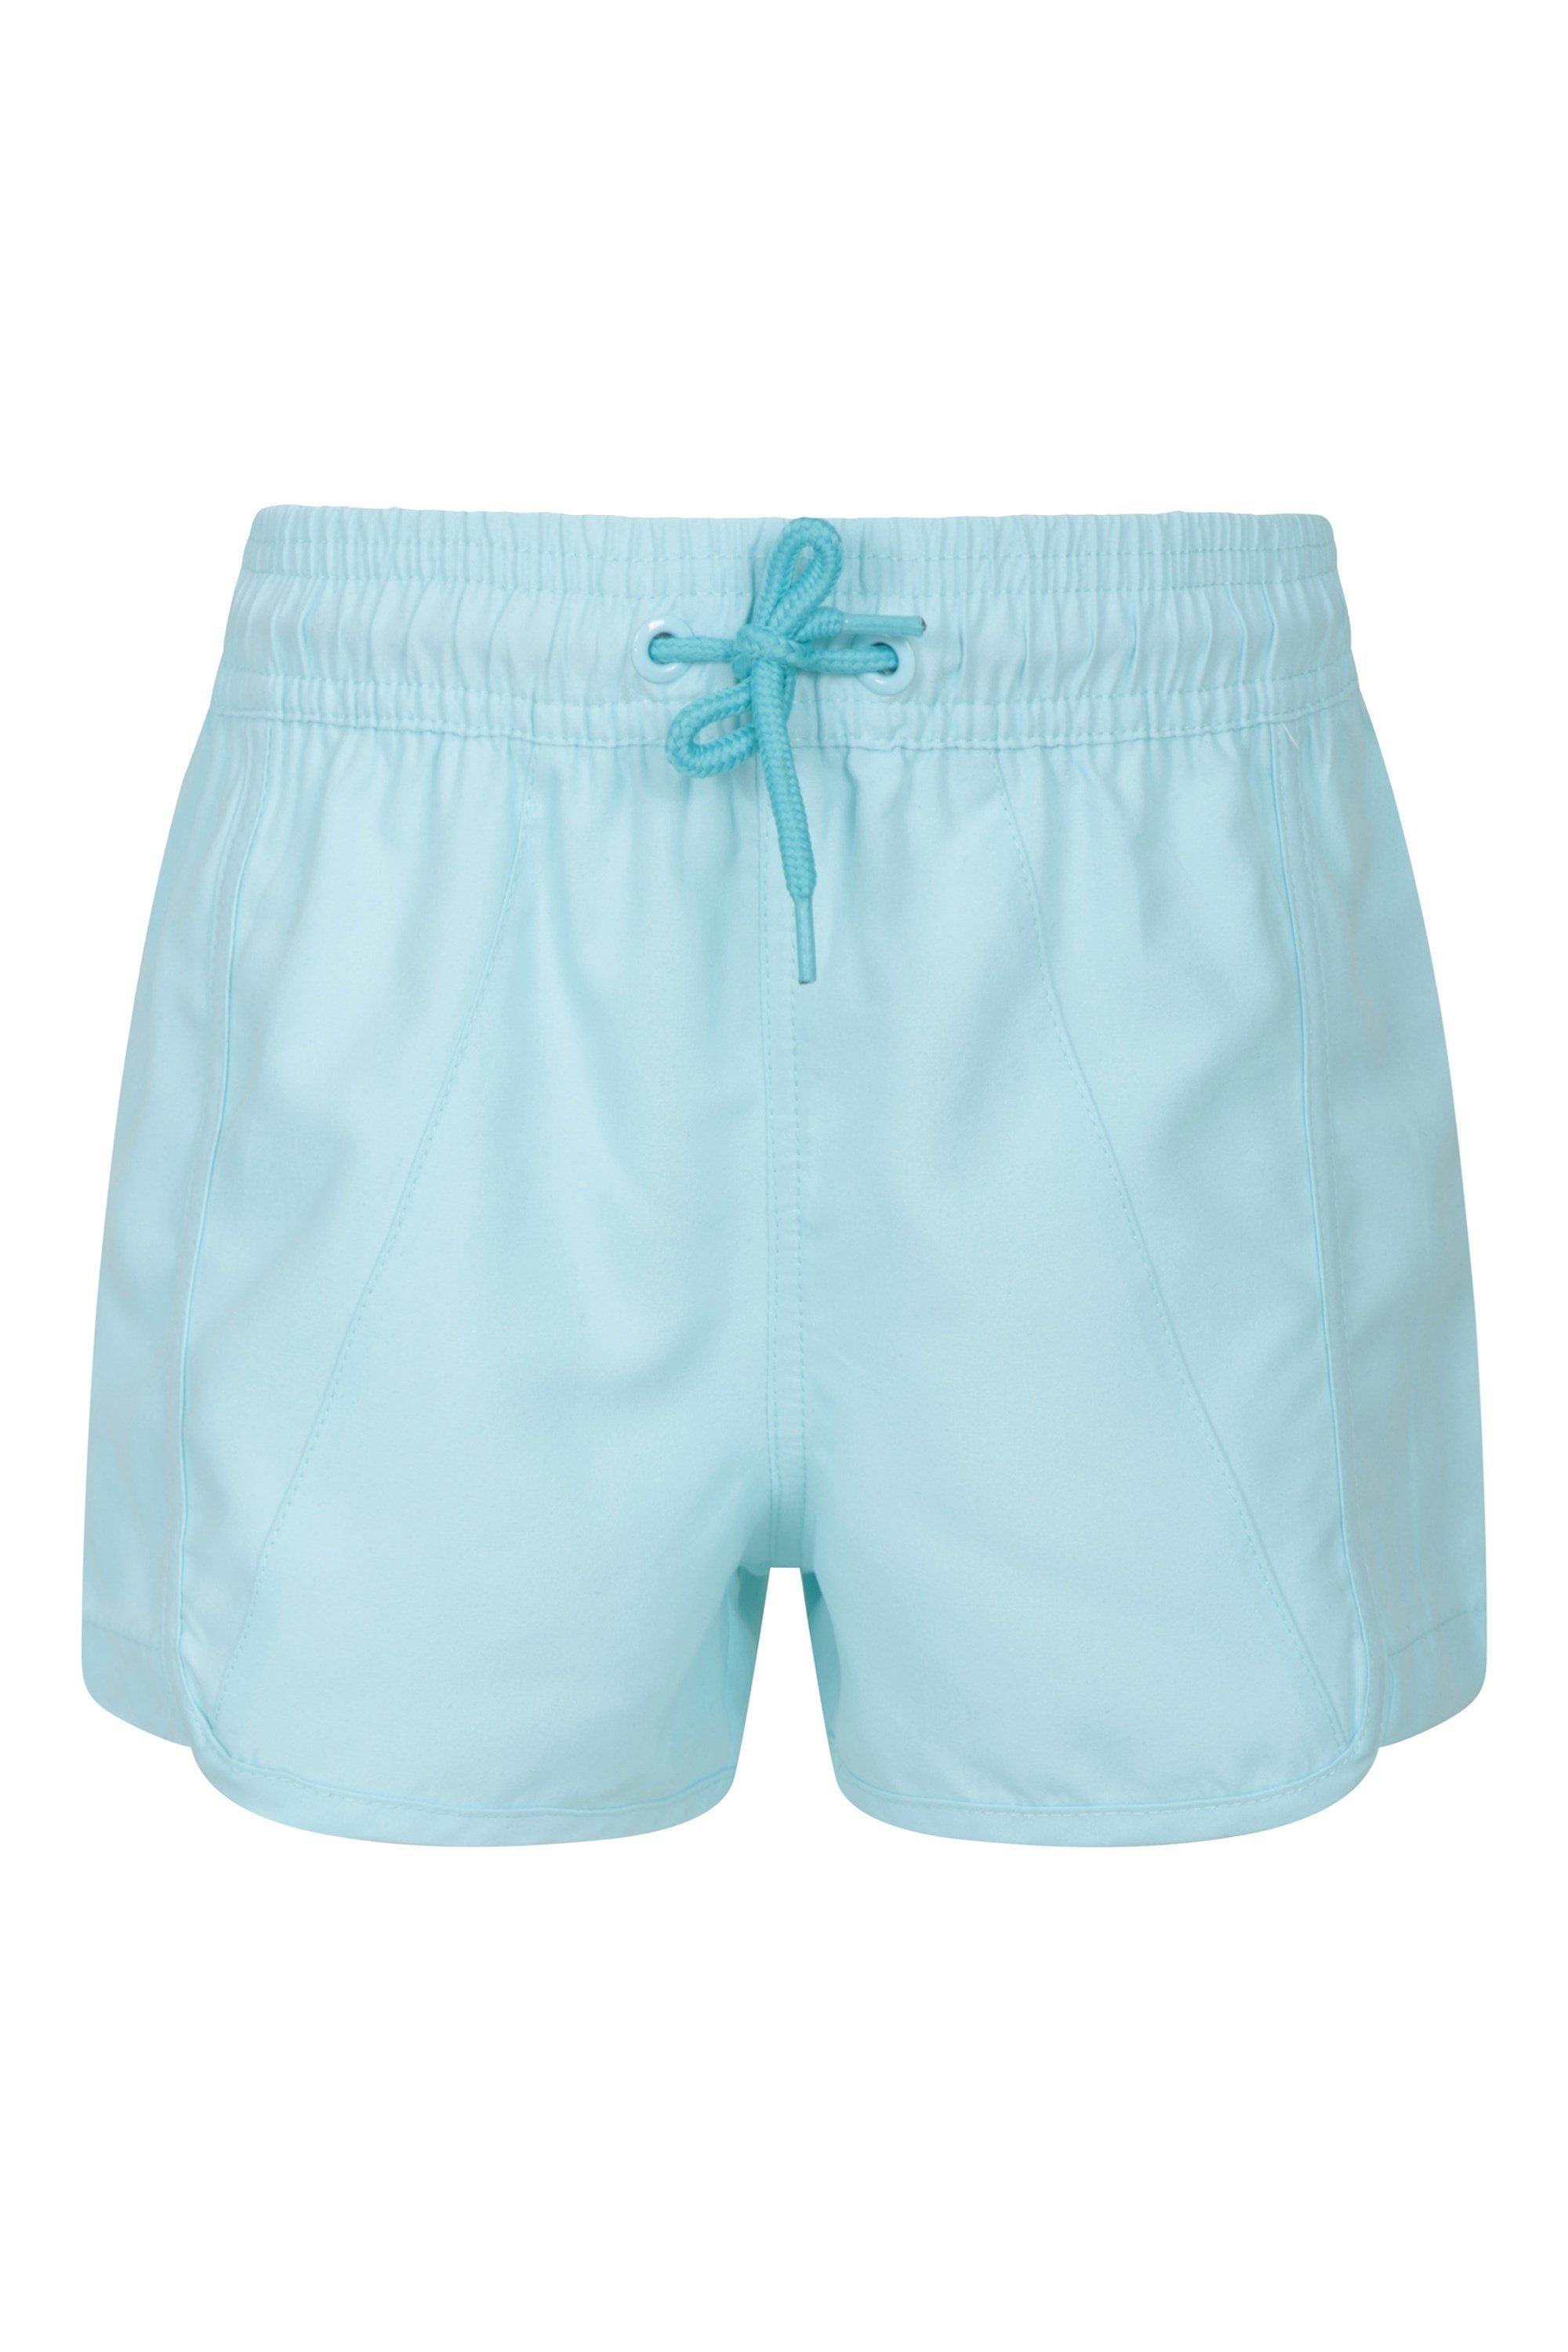 Mountain Warehouse Mountain Warehouse Swim Swimming Shorts 9-10 Years Green Turquoise summer 